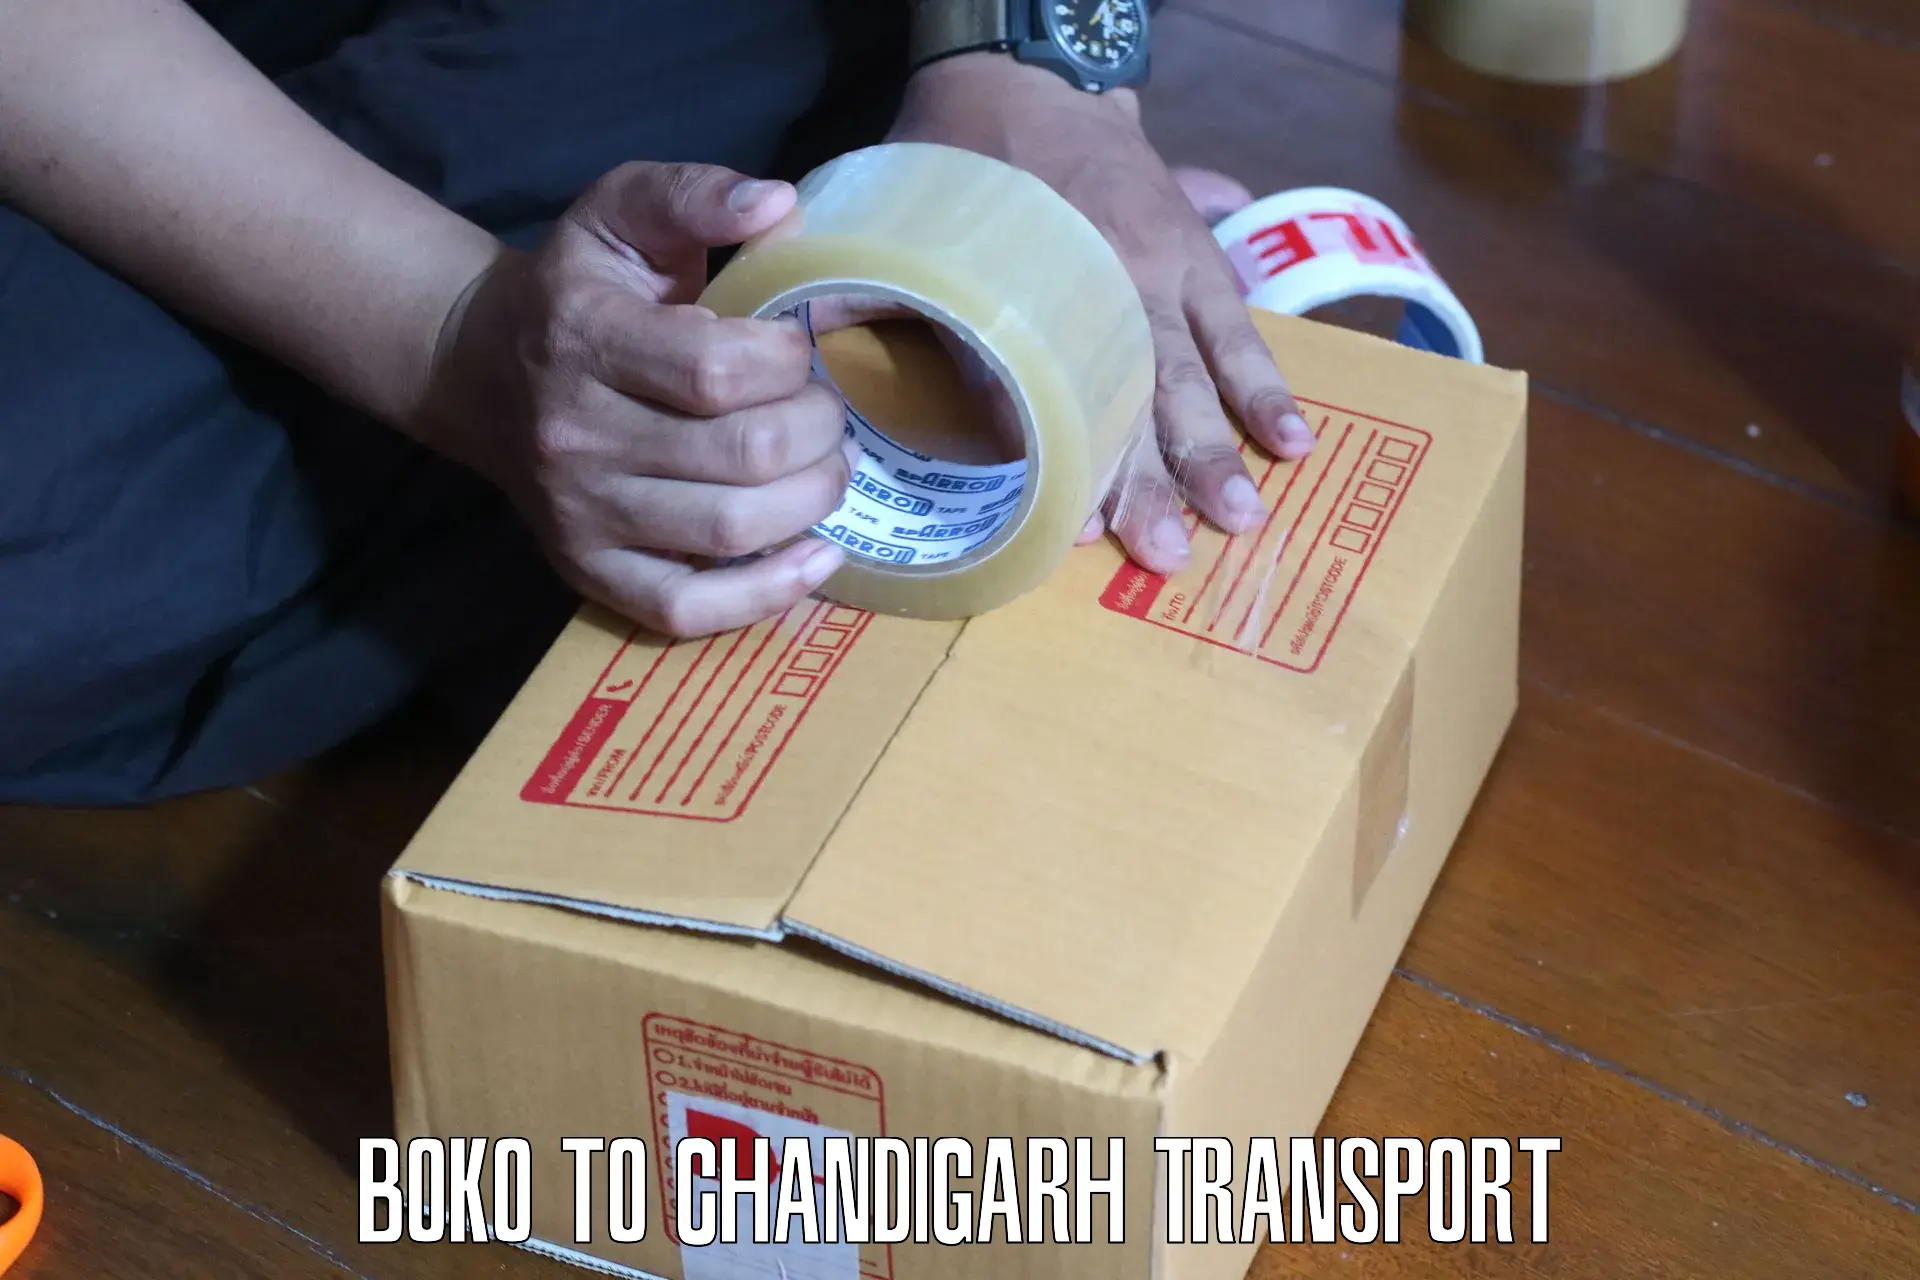 Daily parcel service transport Boko to Chandigarh